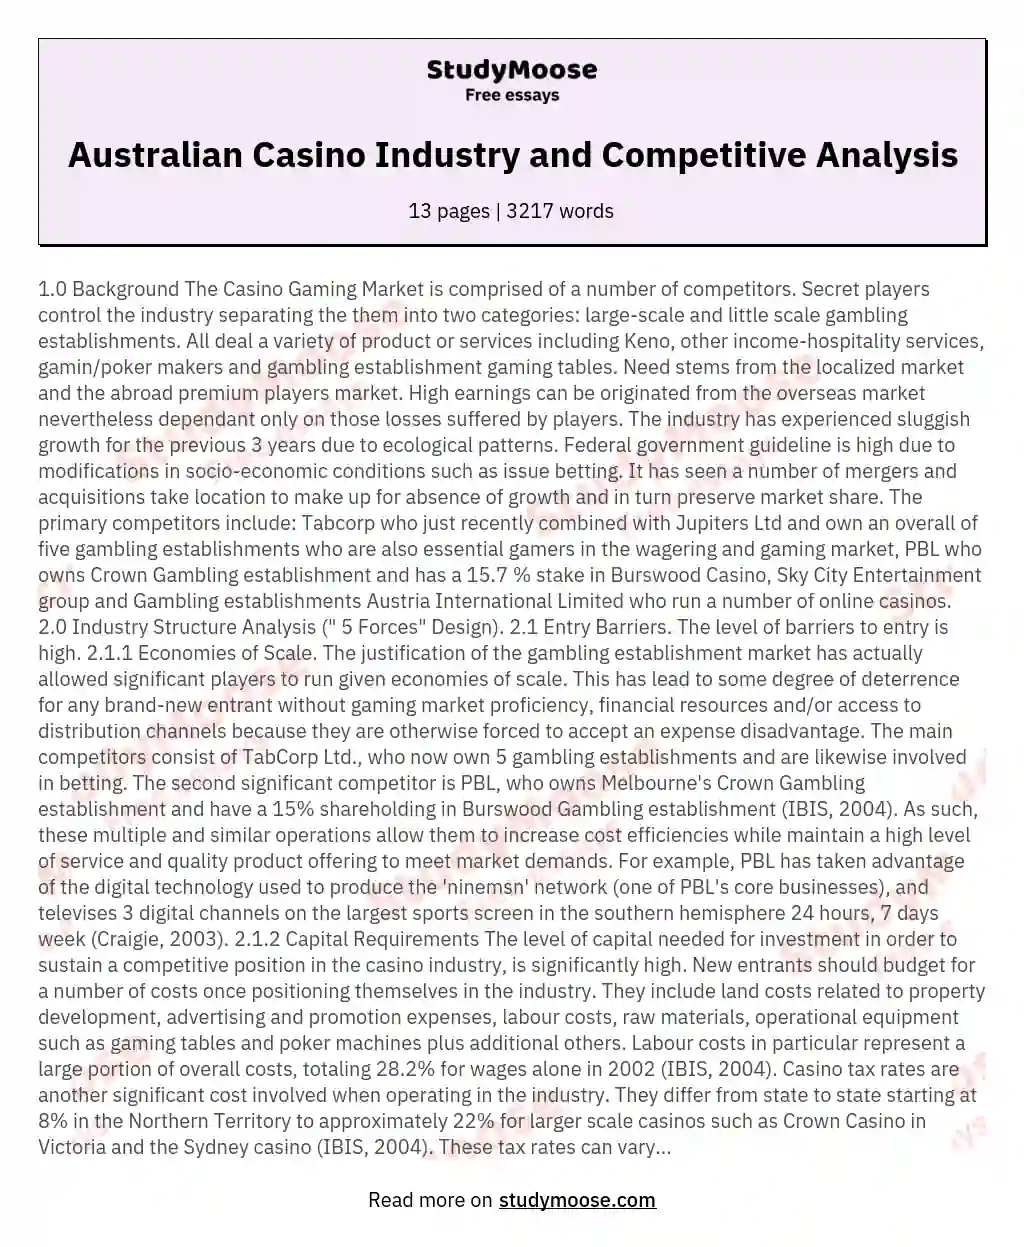 Australian Casino Industry and Competitive Analysis